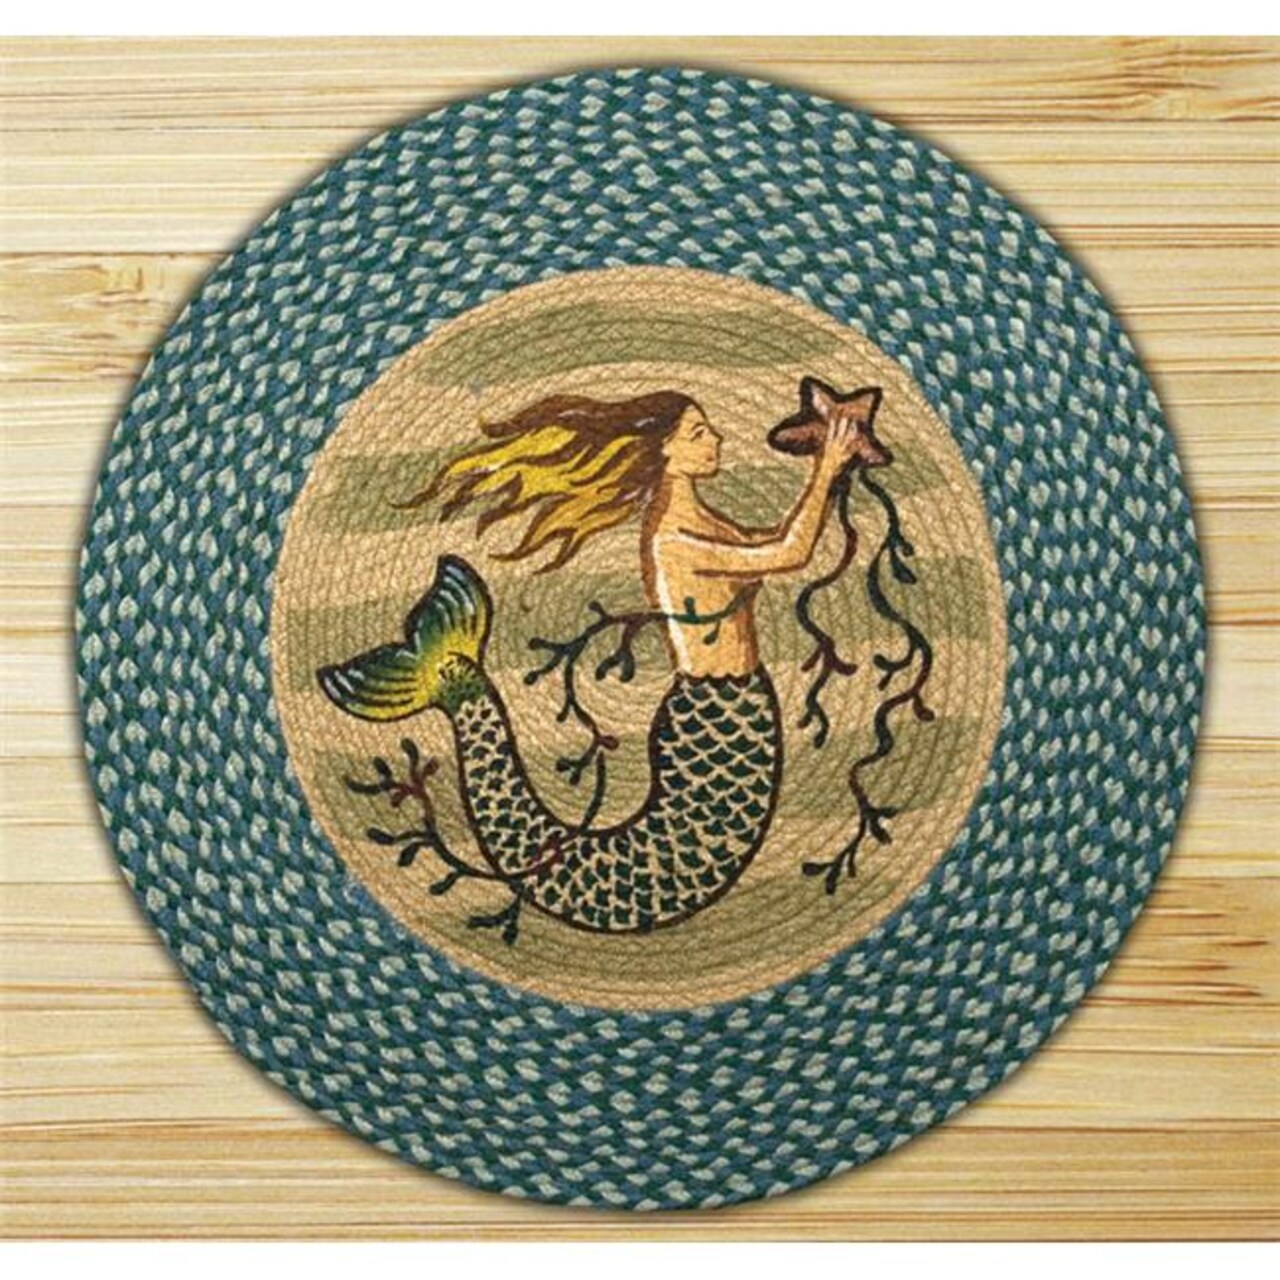 Capitol Importing 66-245M Mermaid - 27 in. x 27 in. Round Patch